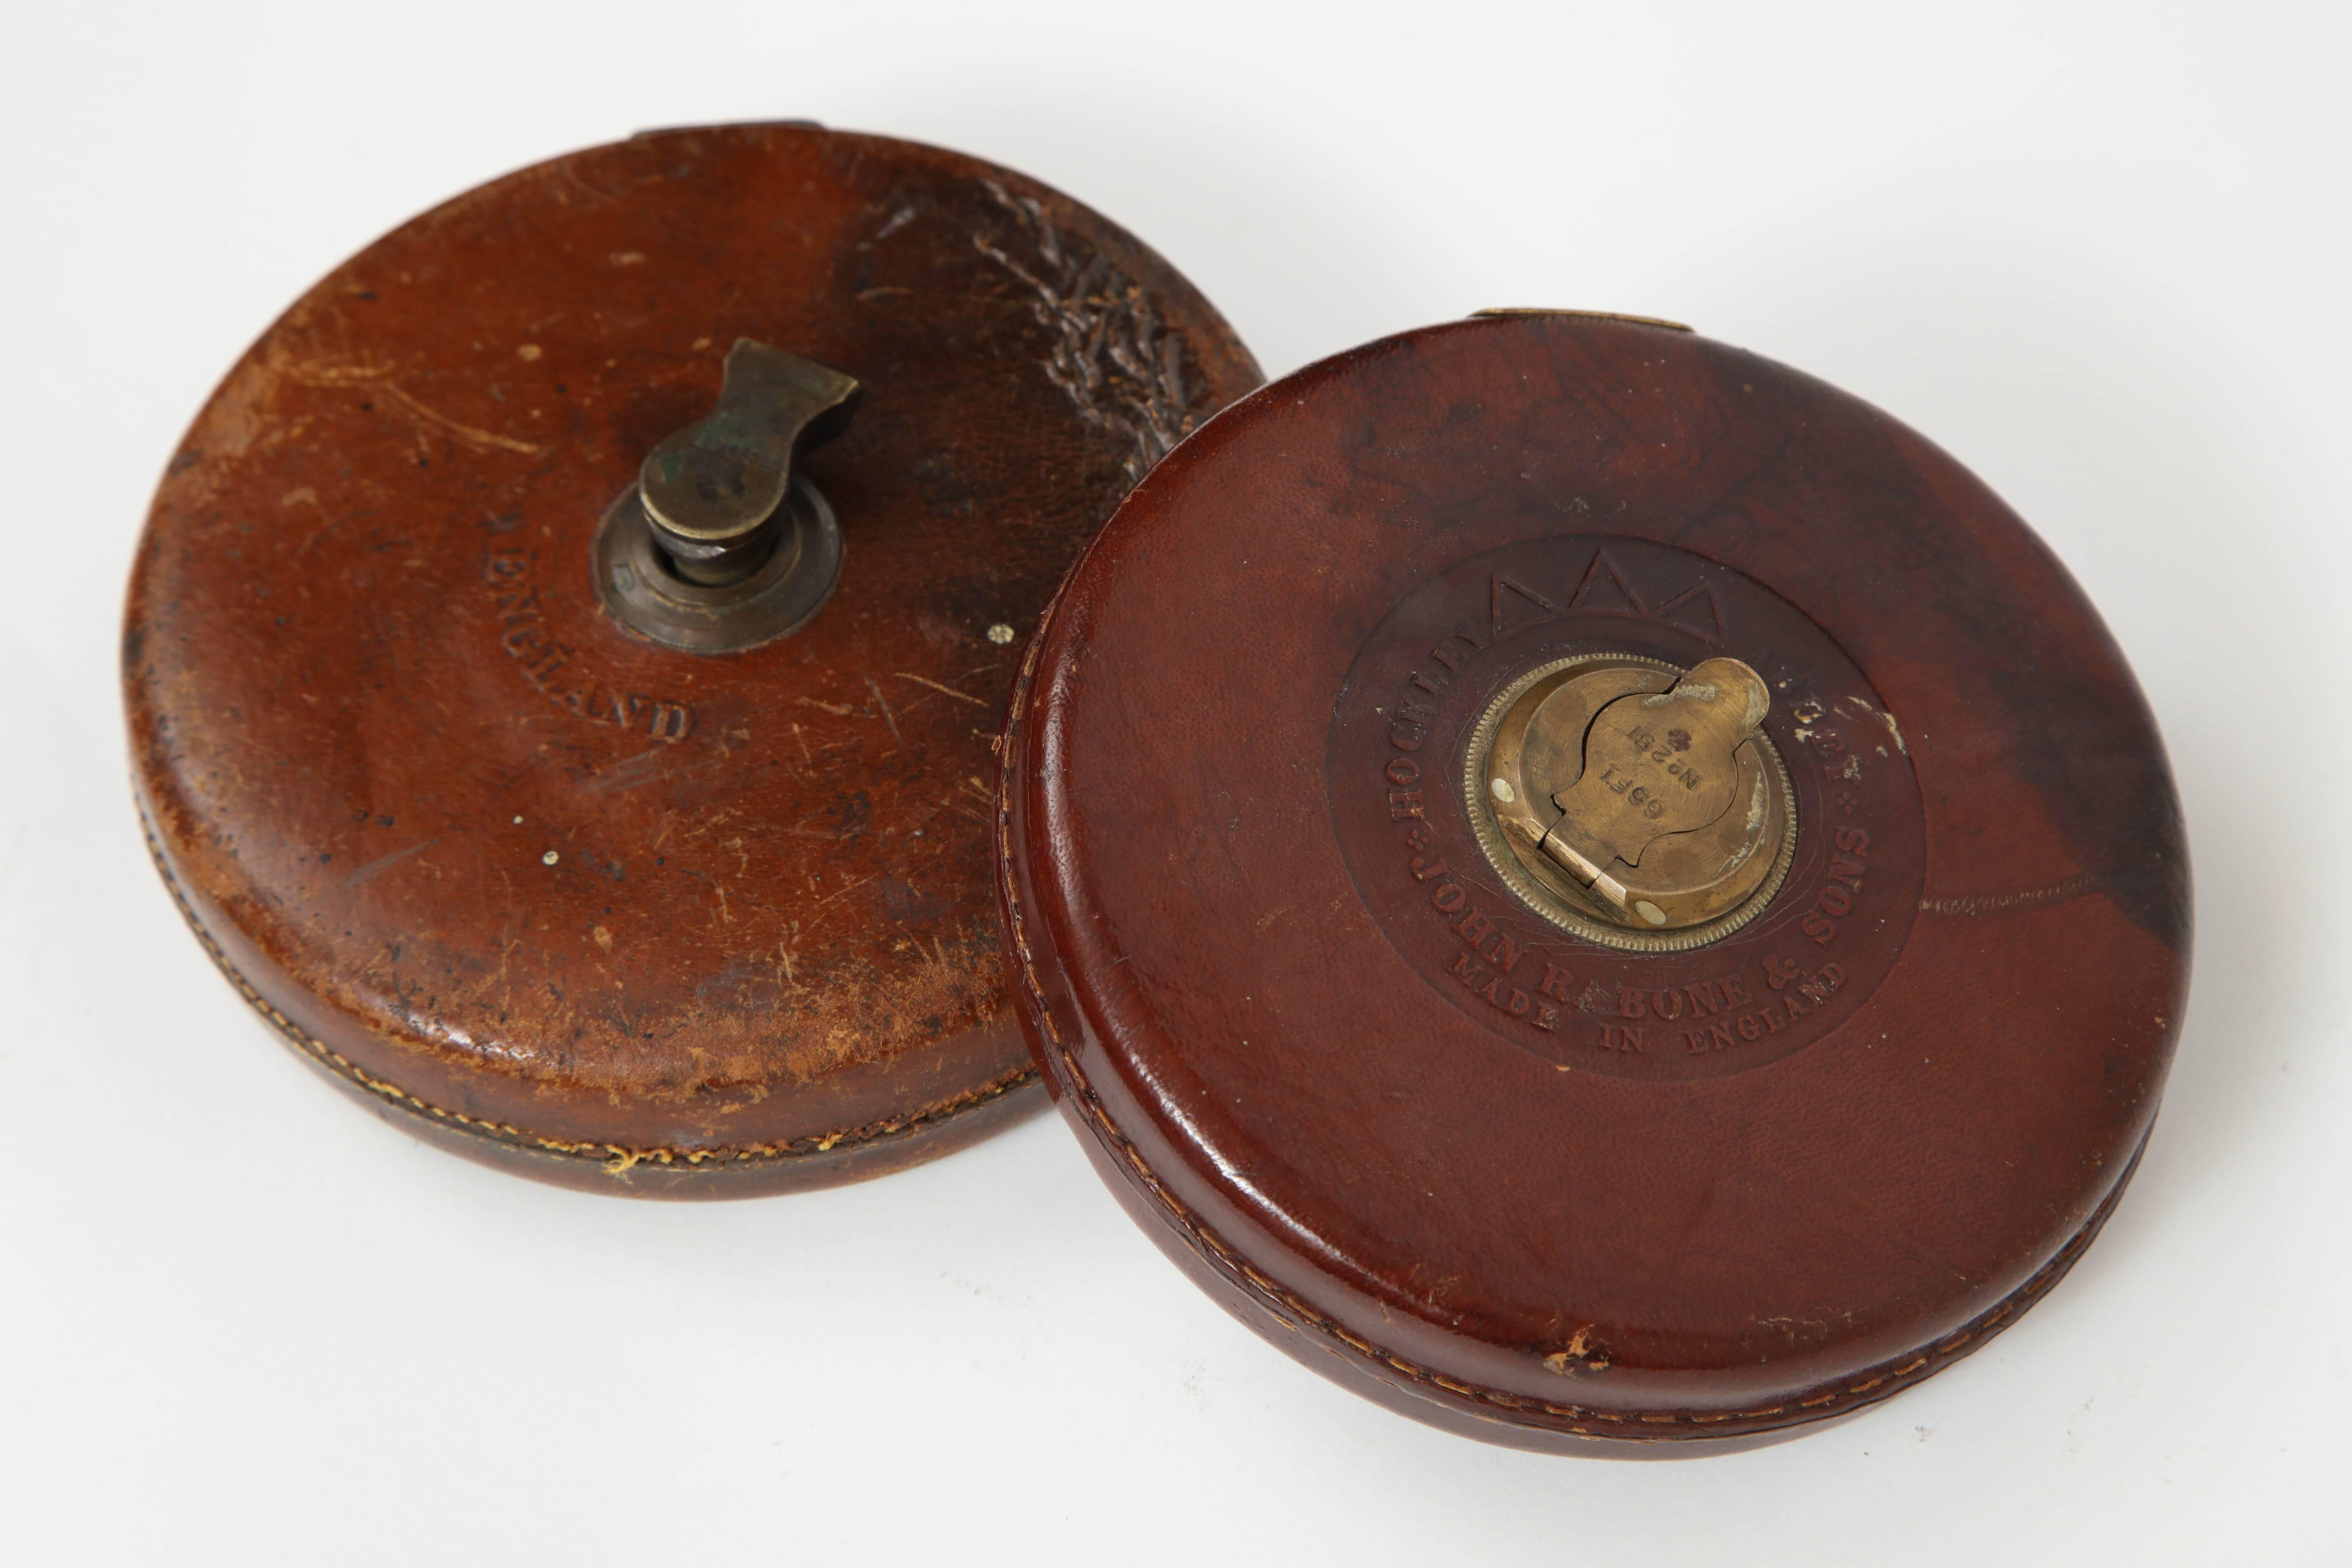 Vintage leather and brass tape measure. Measures: 66 ft.